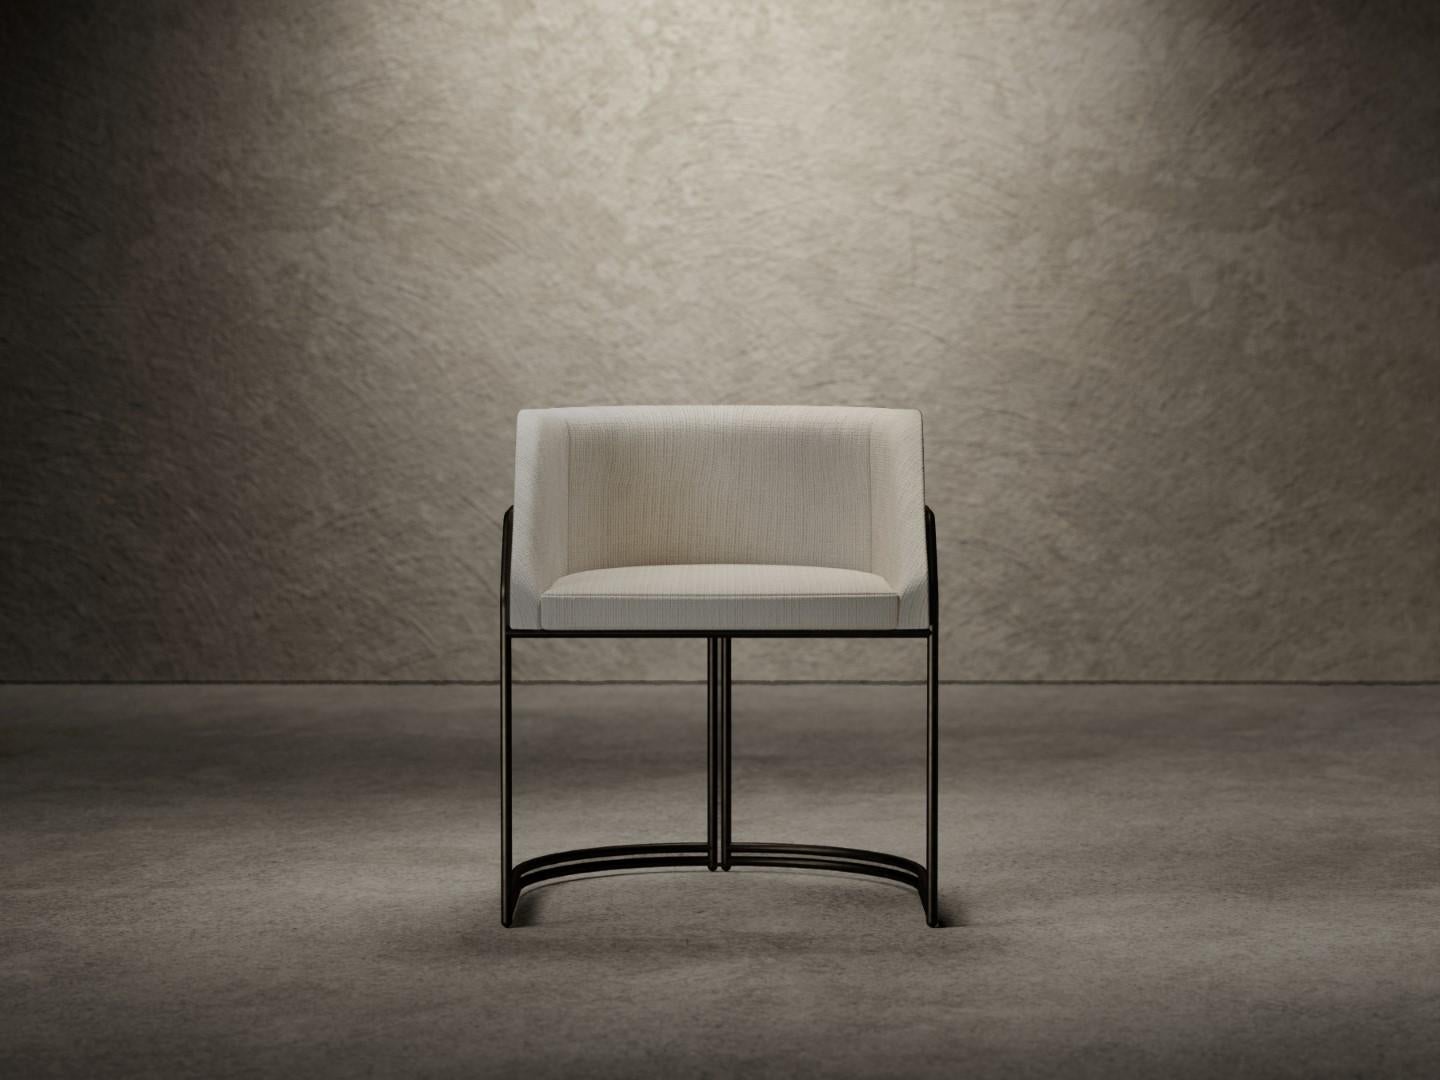 Déjà Vu chair is composed of a wooden shell padded with different densities polyurethane foam and finished with an upper layer of acrylic fiber. 
The seat is available completely covered in fabric or leather, while the base is in the metal finishes